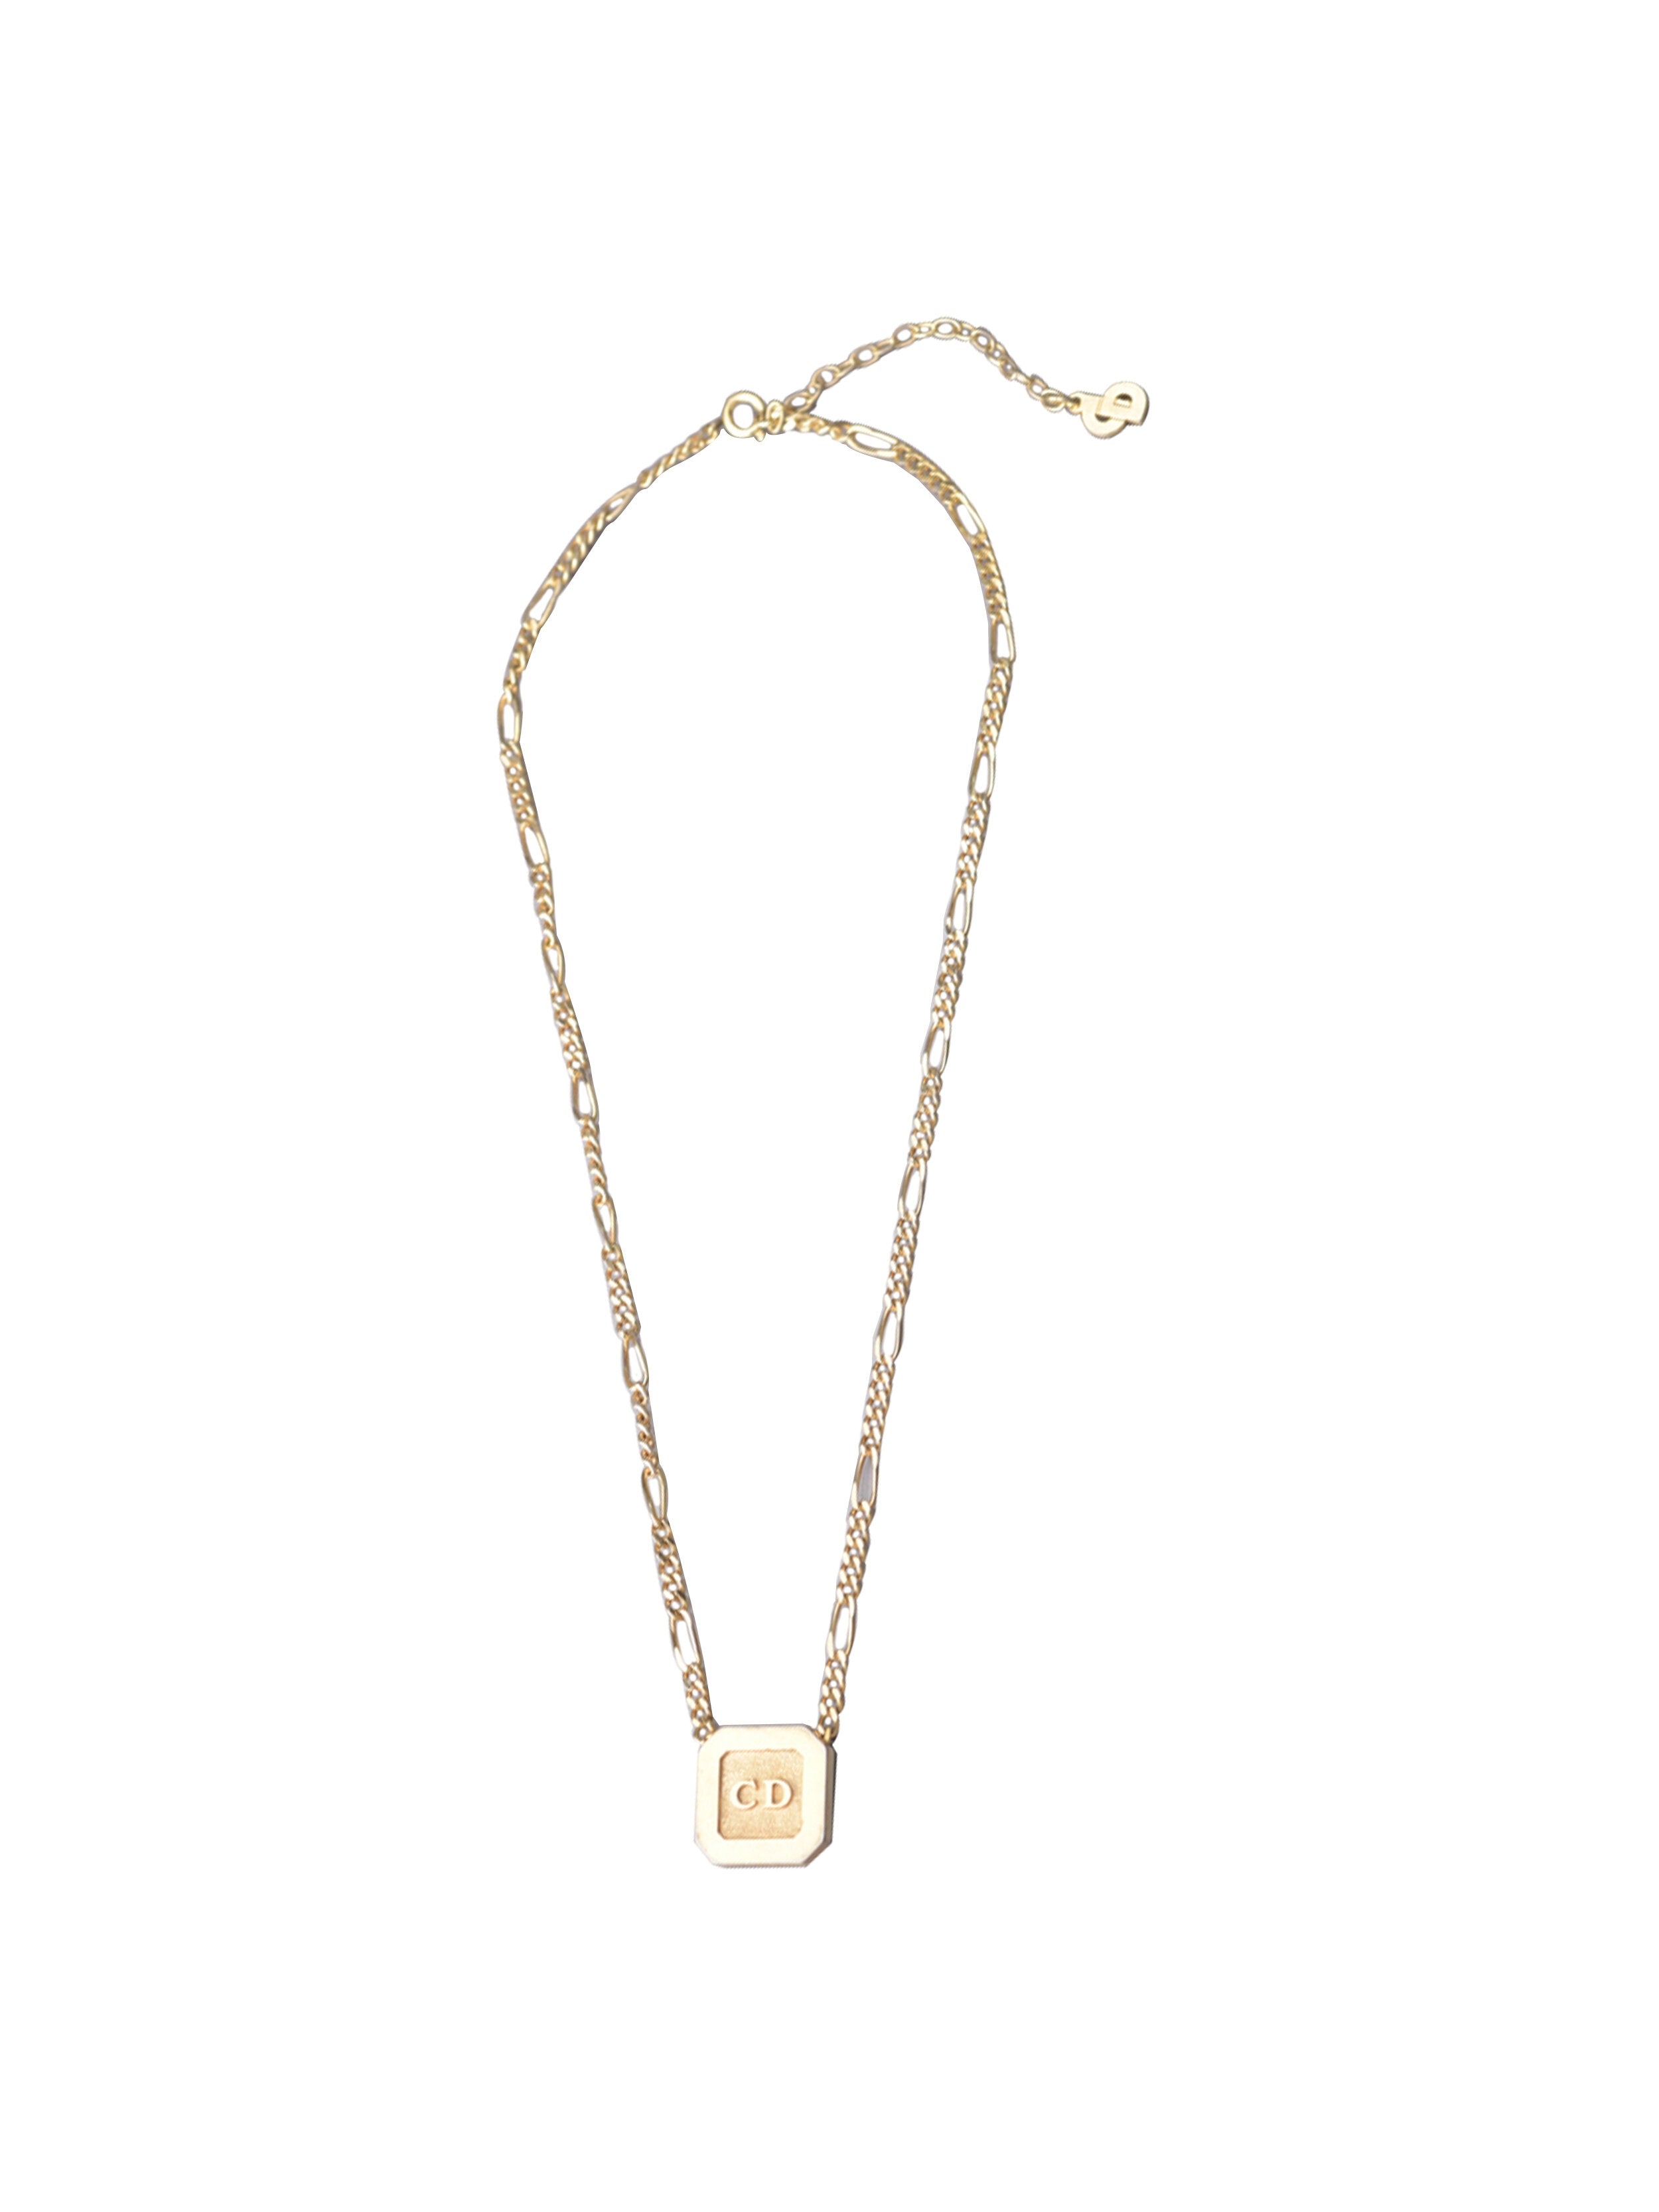 Christian Dior 2000s Gold Square Necklace